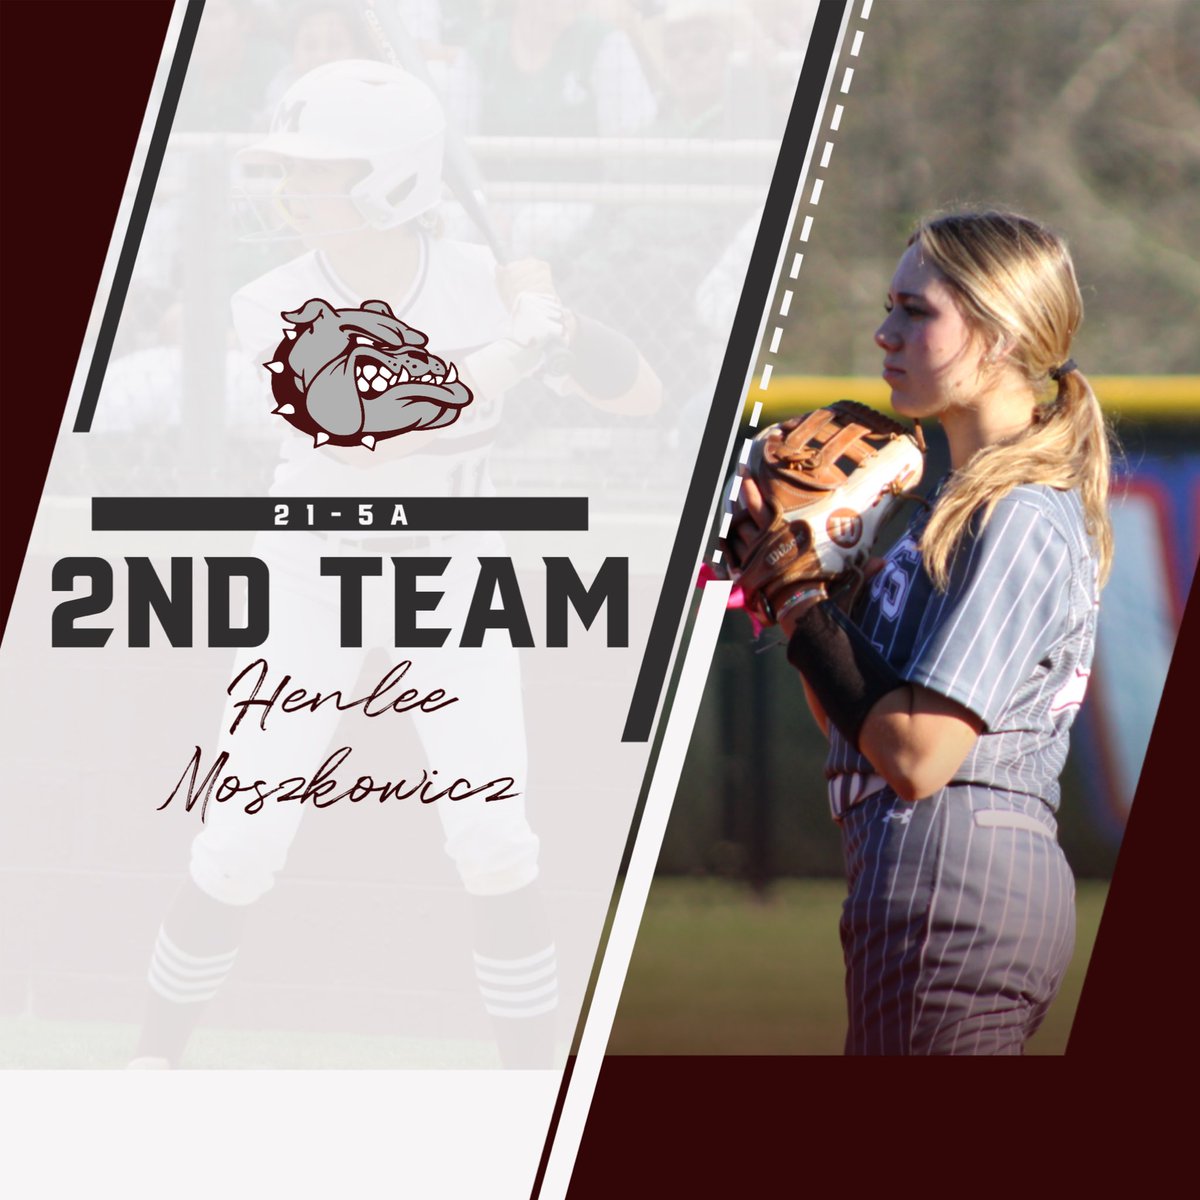 Congratulations to Sophomore Henlee Moszkowicz for being named 21-5A 2nd Team #AlwaysABulldog @MagISDAthletics @MagnoliaISD @MagnoliaHighTX